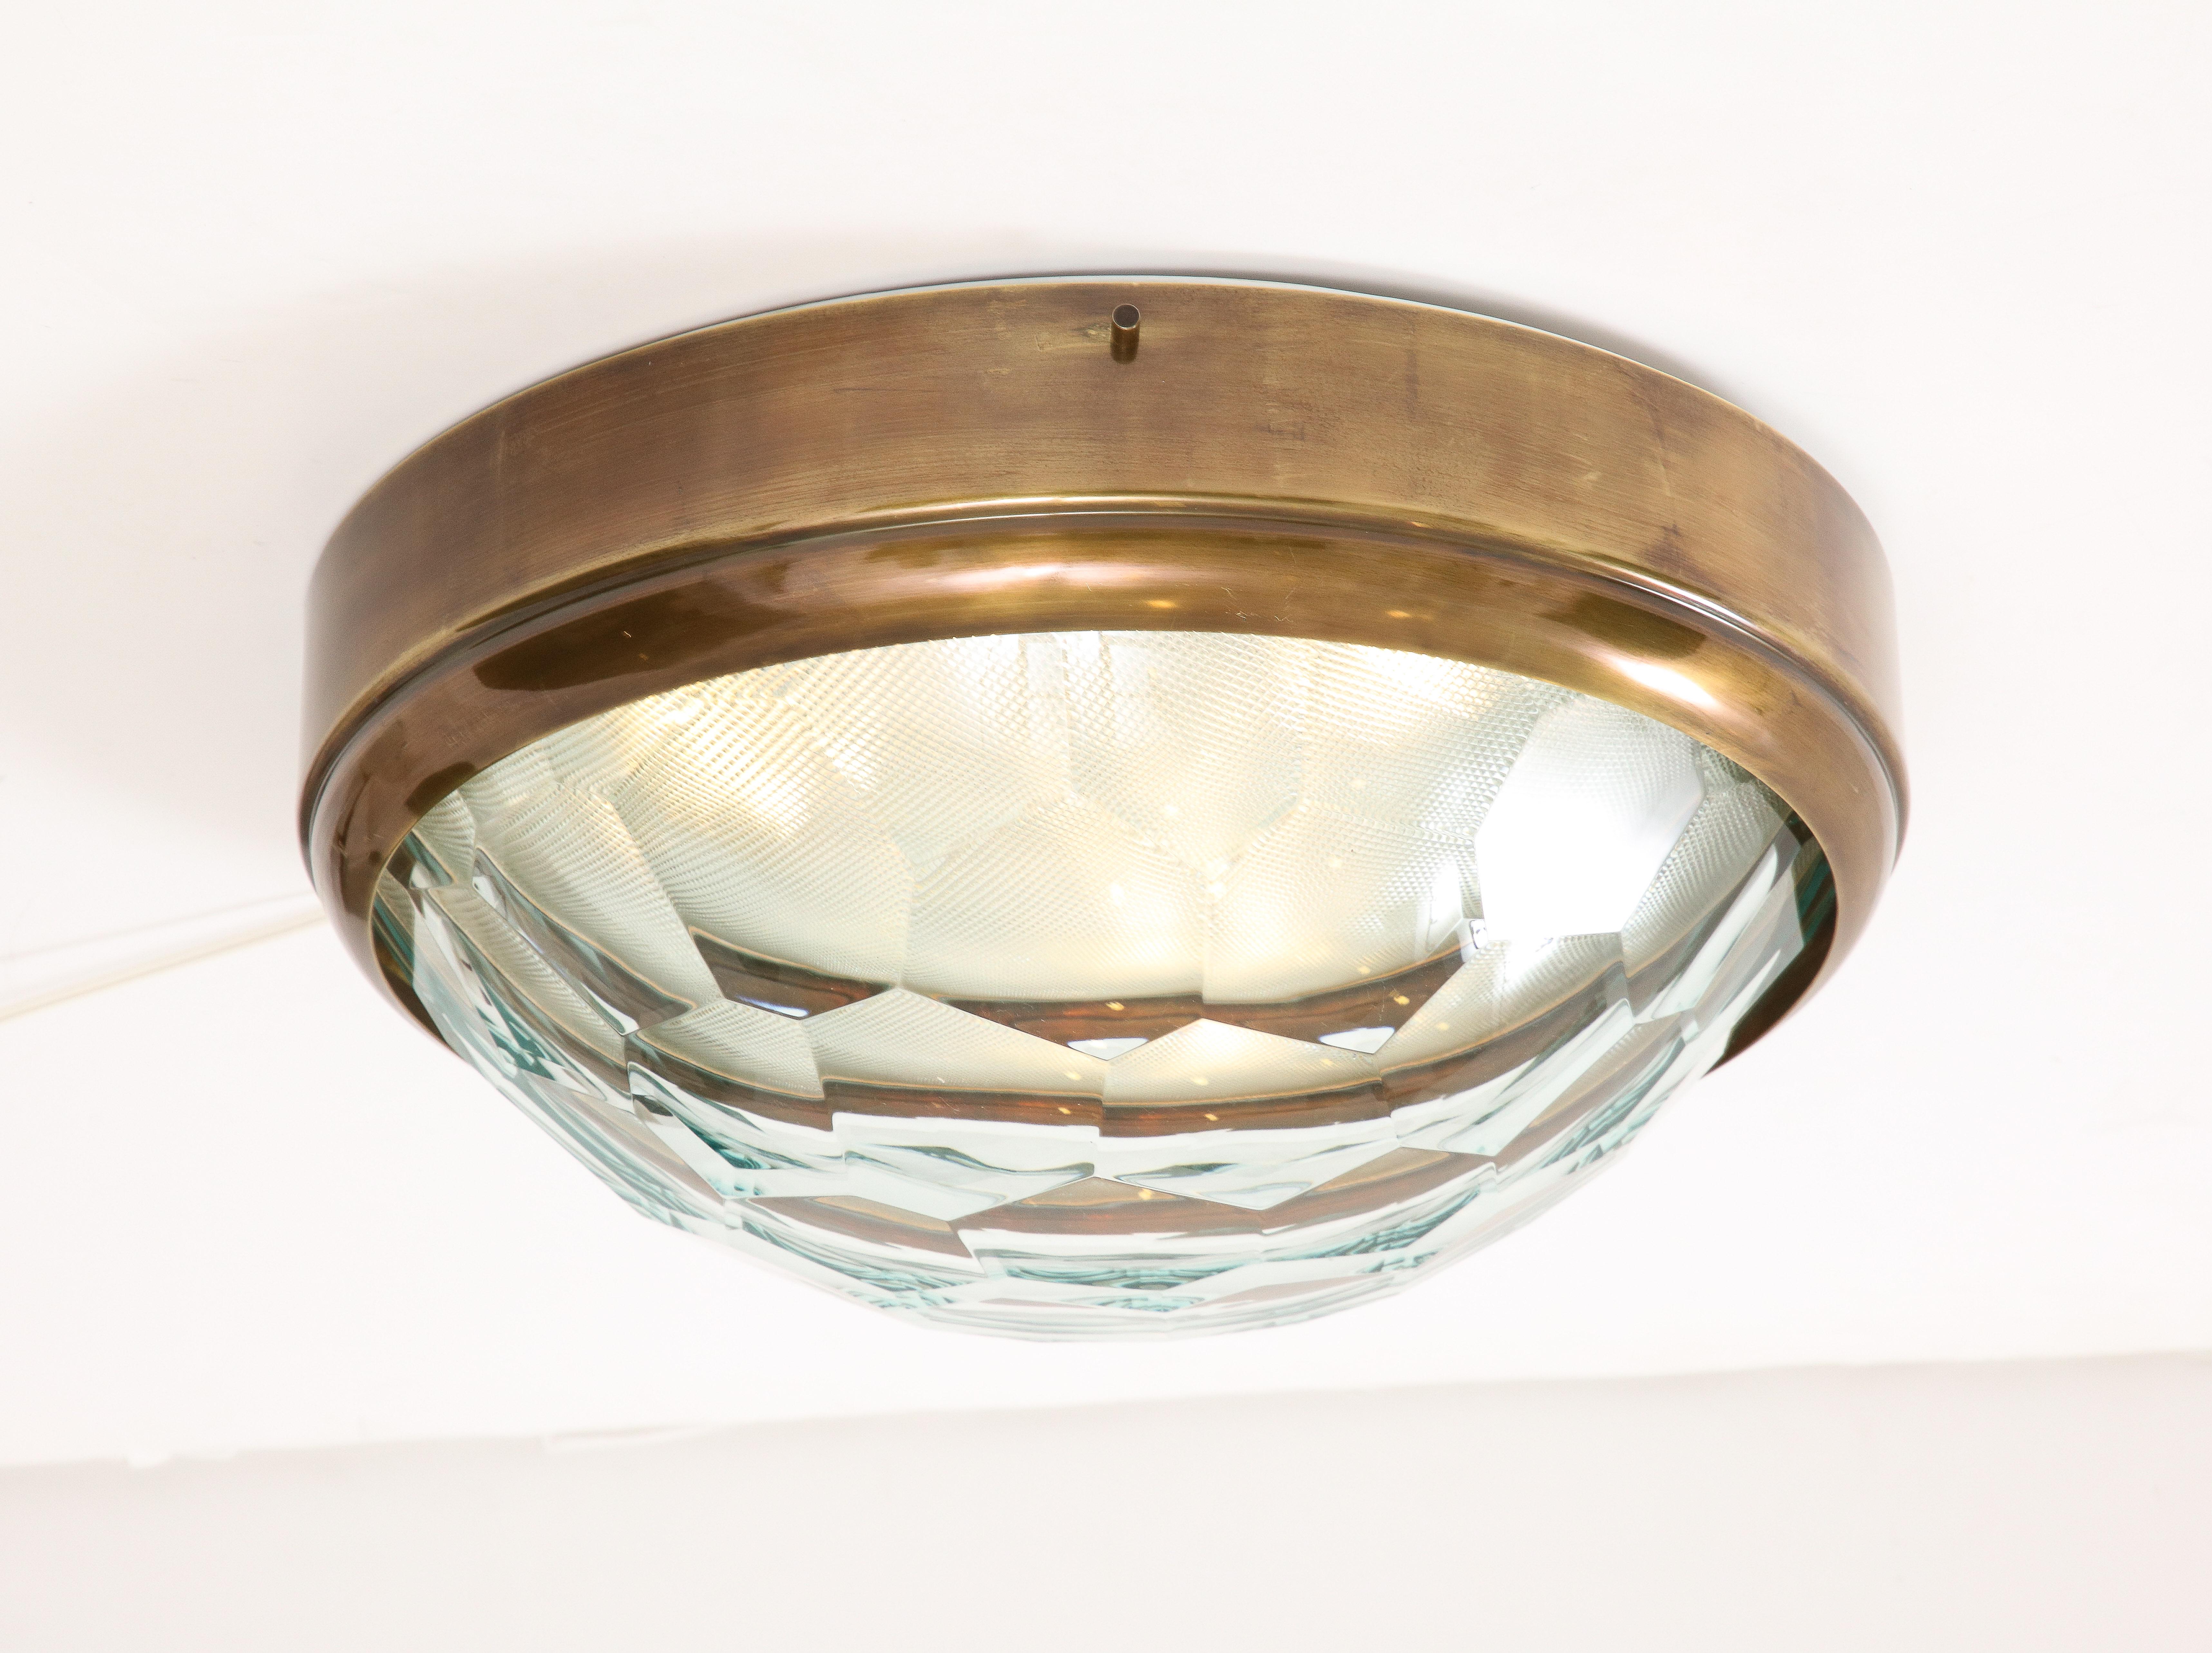 Elegant large flush mount ceiling light in the style of Fontana Arte with faceted glass diffuser on brass mount, Italy, 1960s. This lovely ceiling light reflects the light beautifully as it diffuses it through the faceted glass.
Recently rewired to